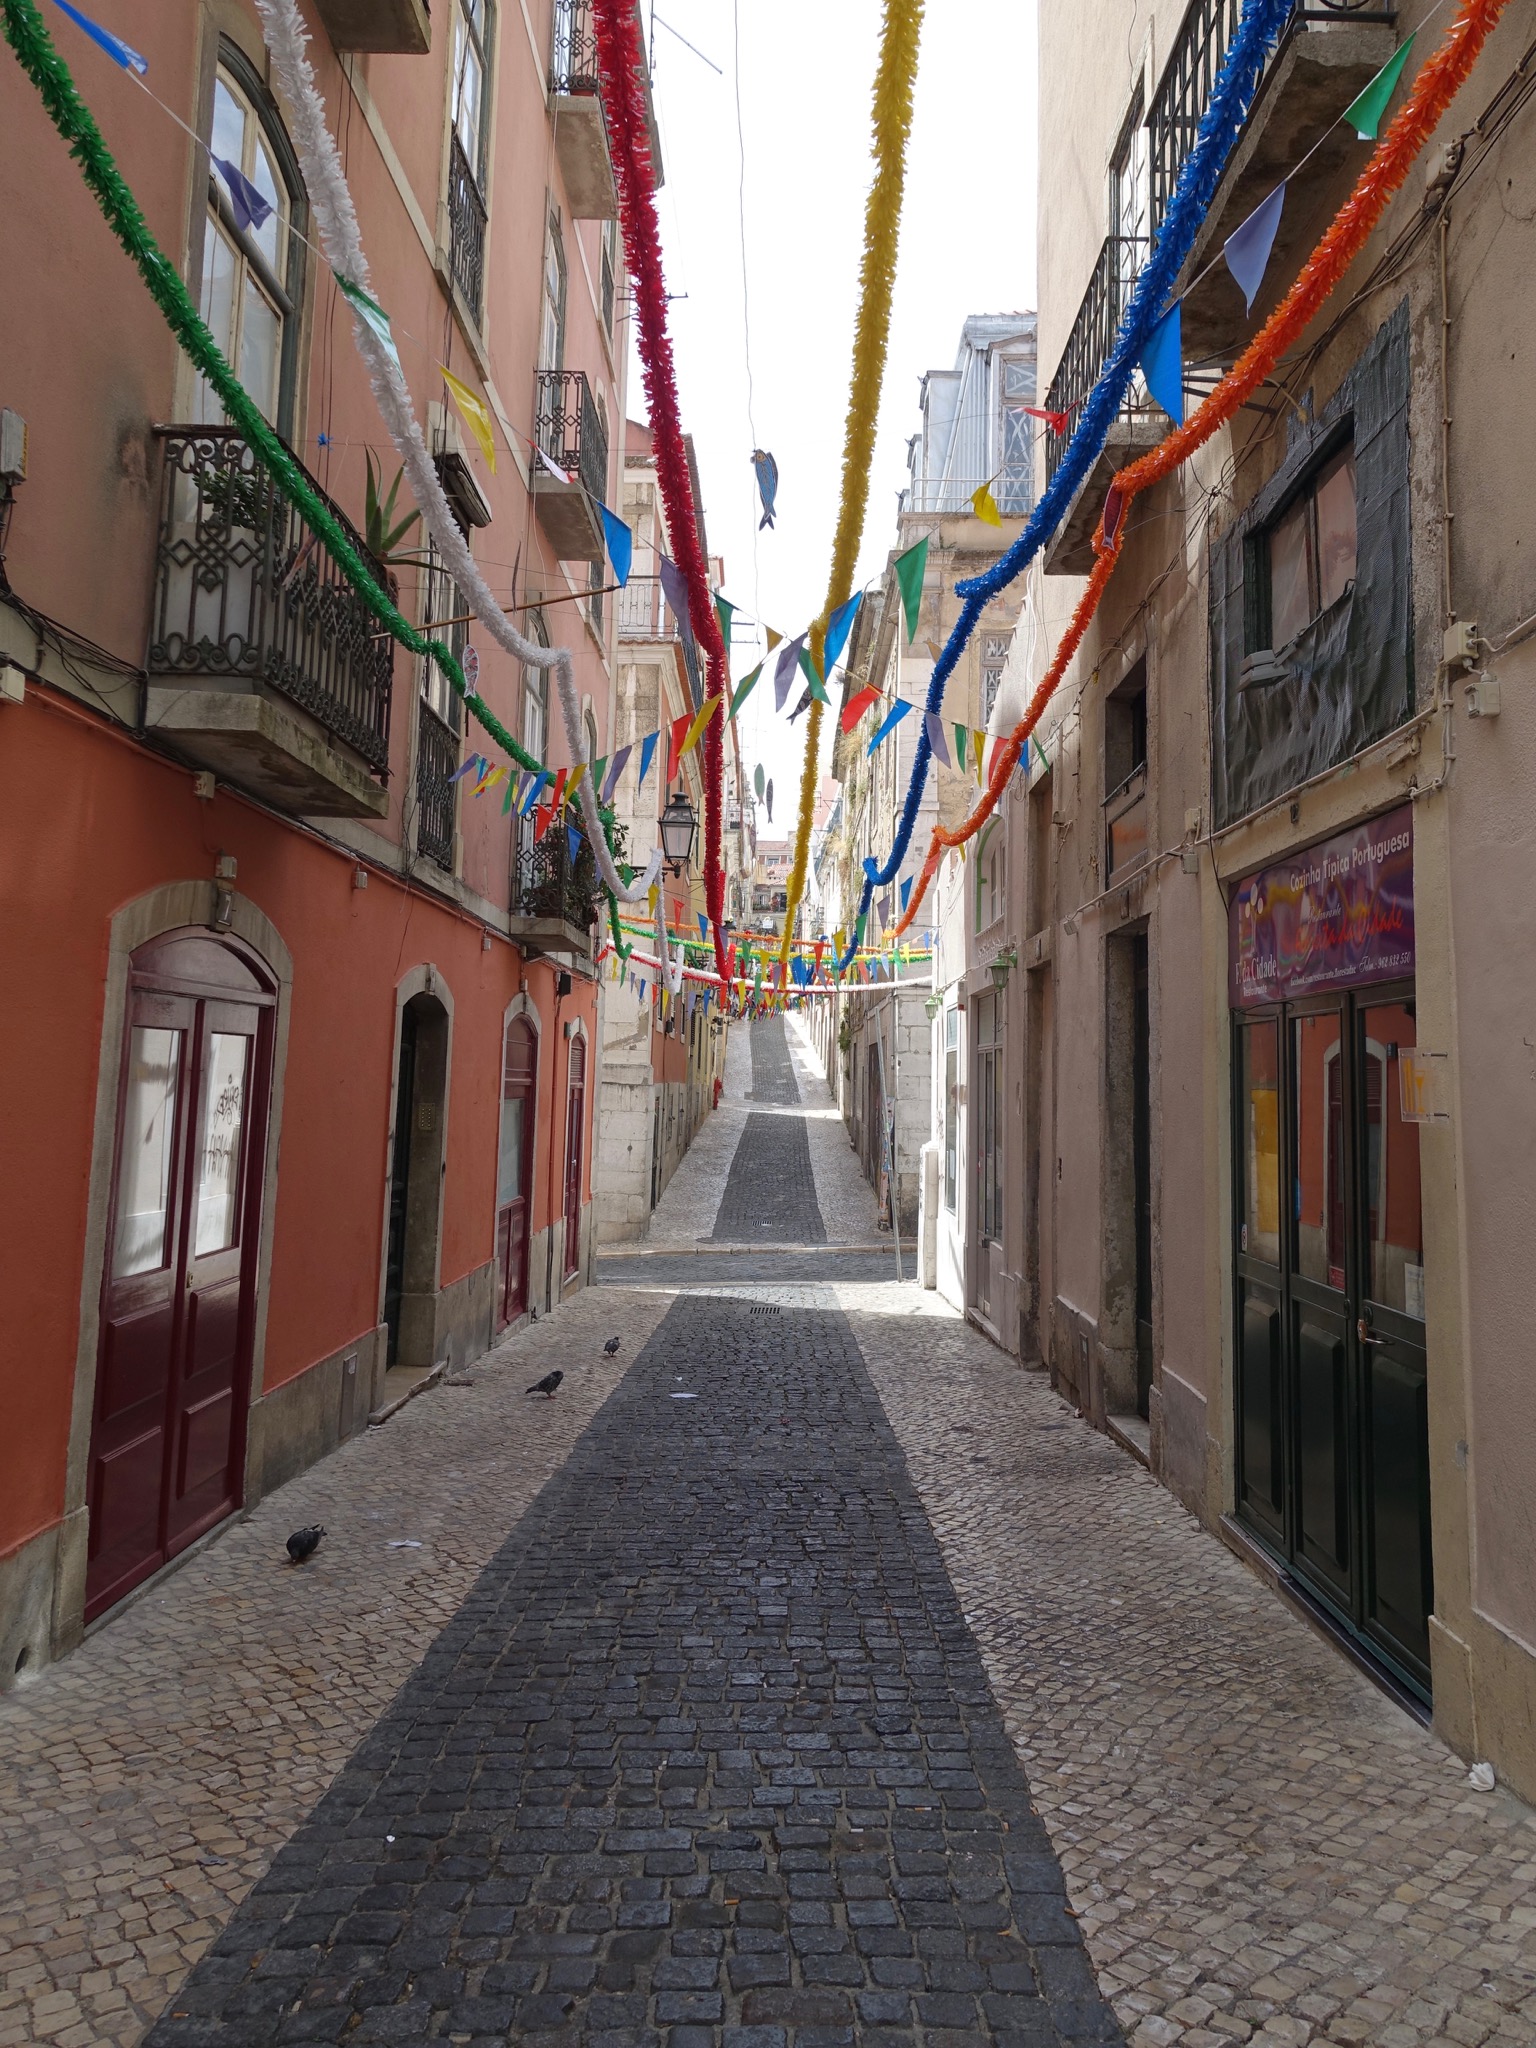 Photo 69 of 86 from the album Highlights Lisbon 2015.